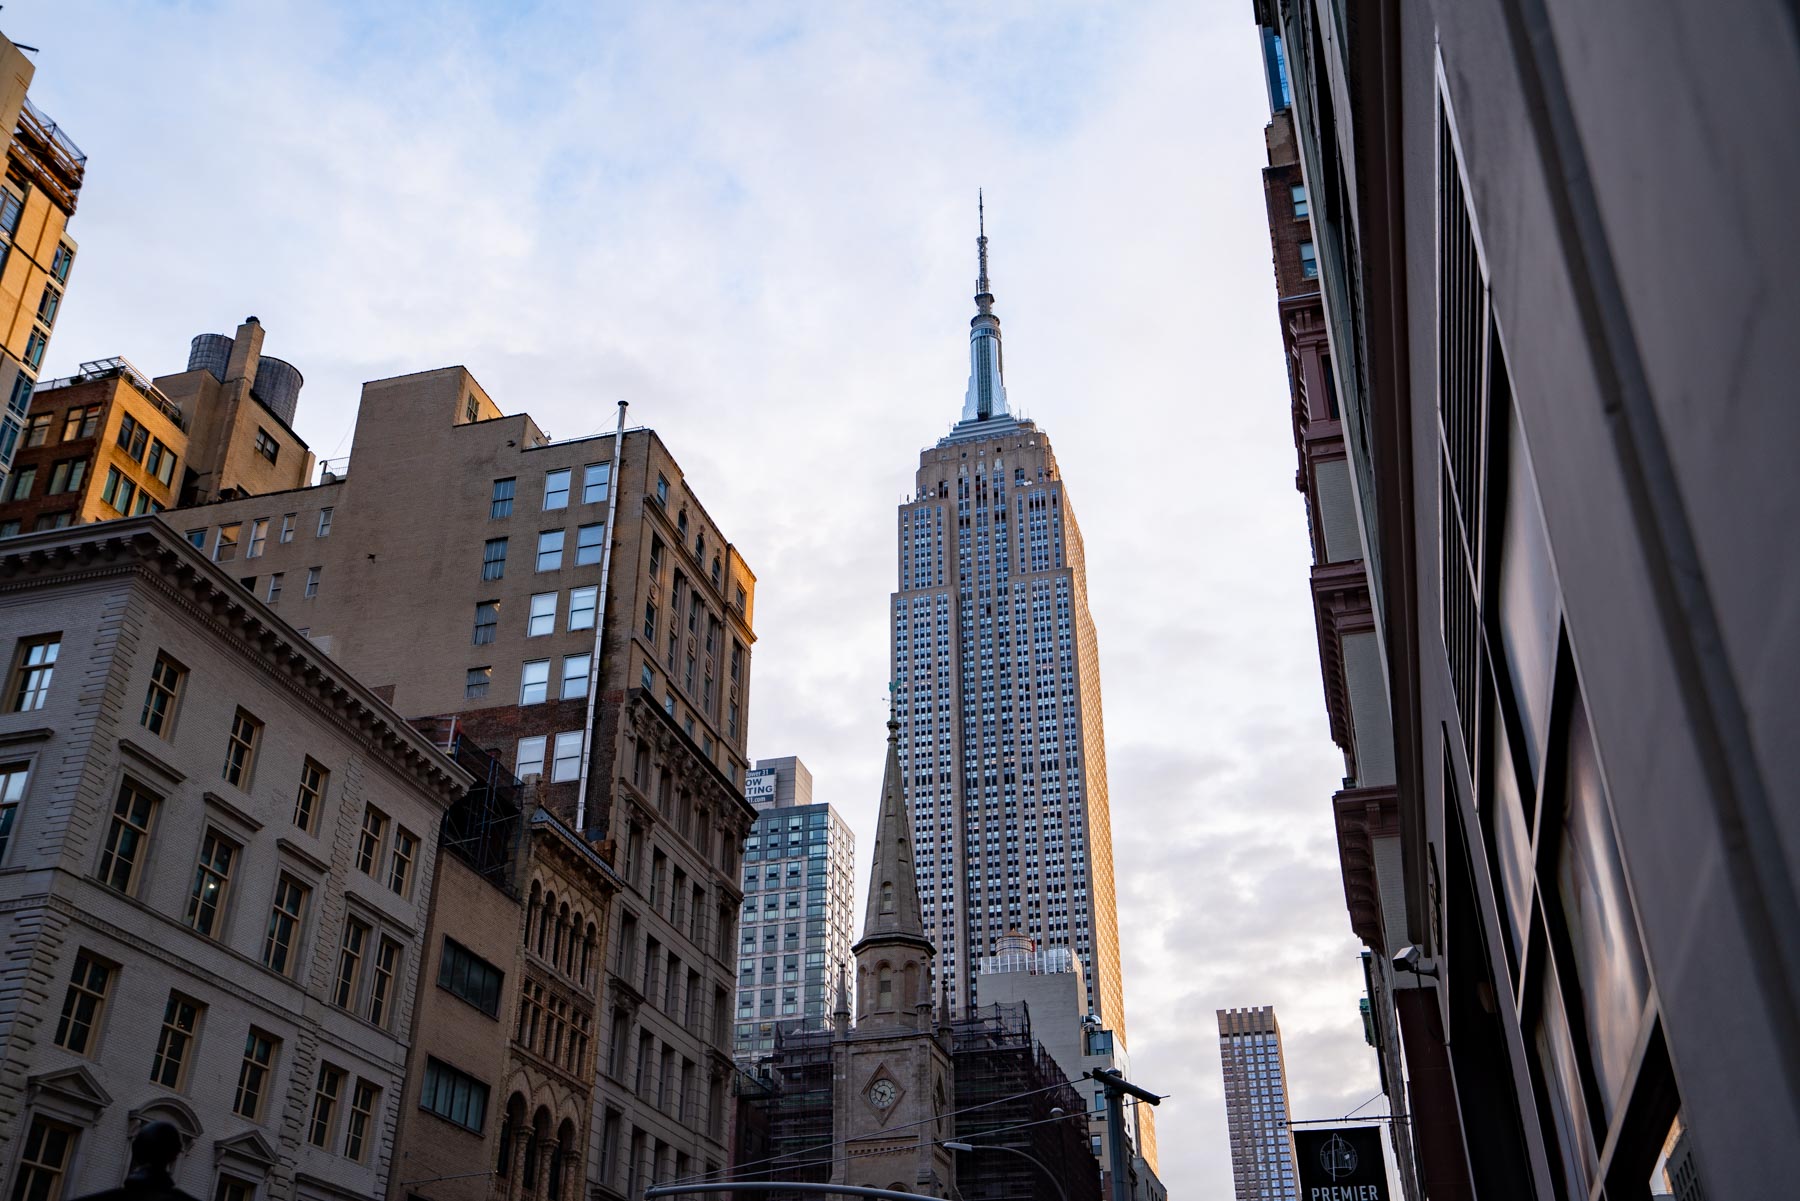 Street view of The Empire State Building, one of NYC's tallest buildings